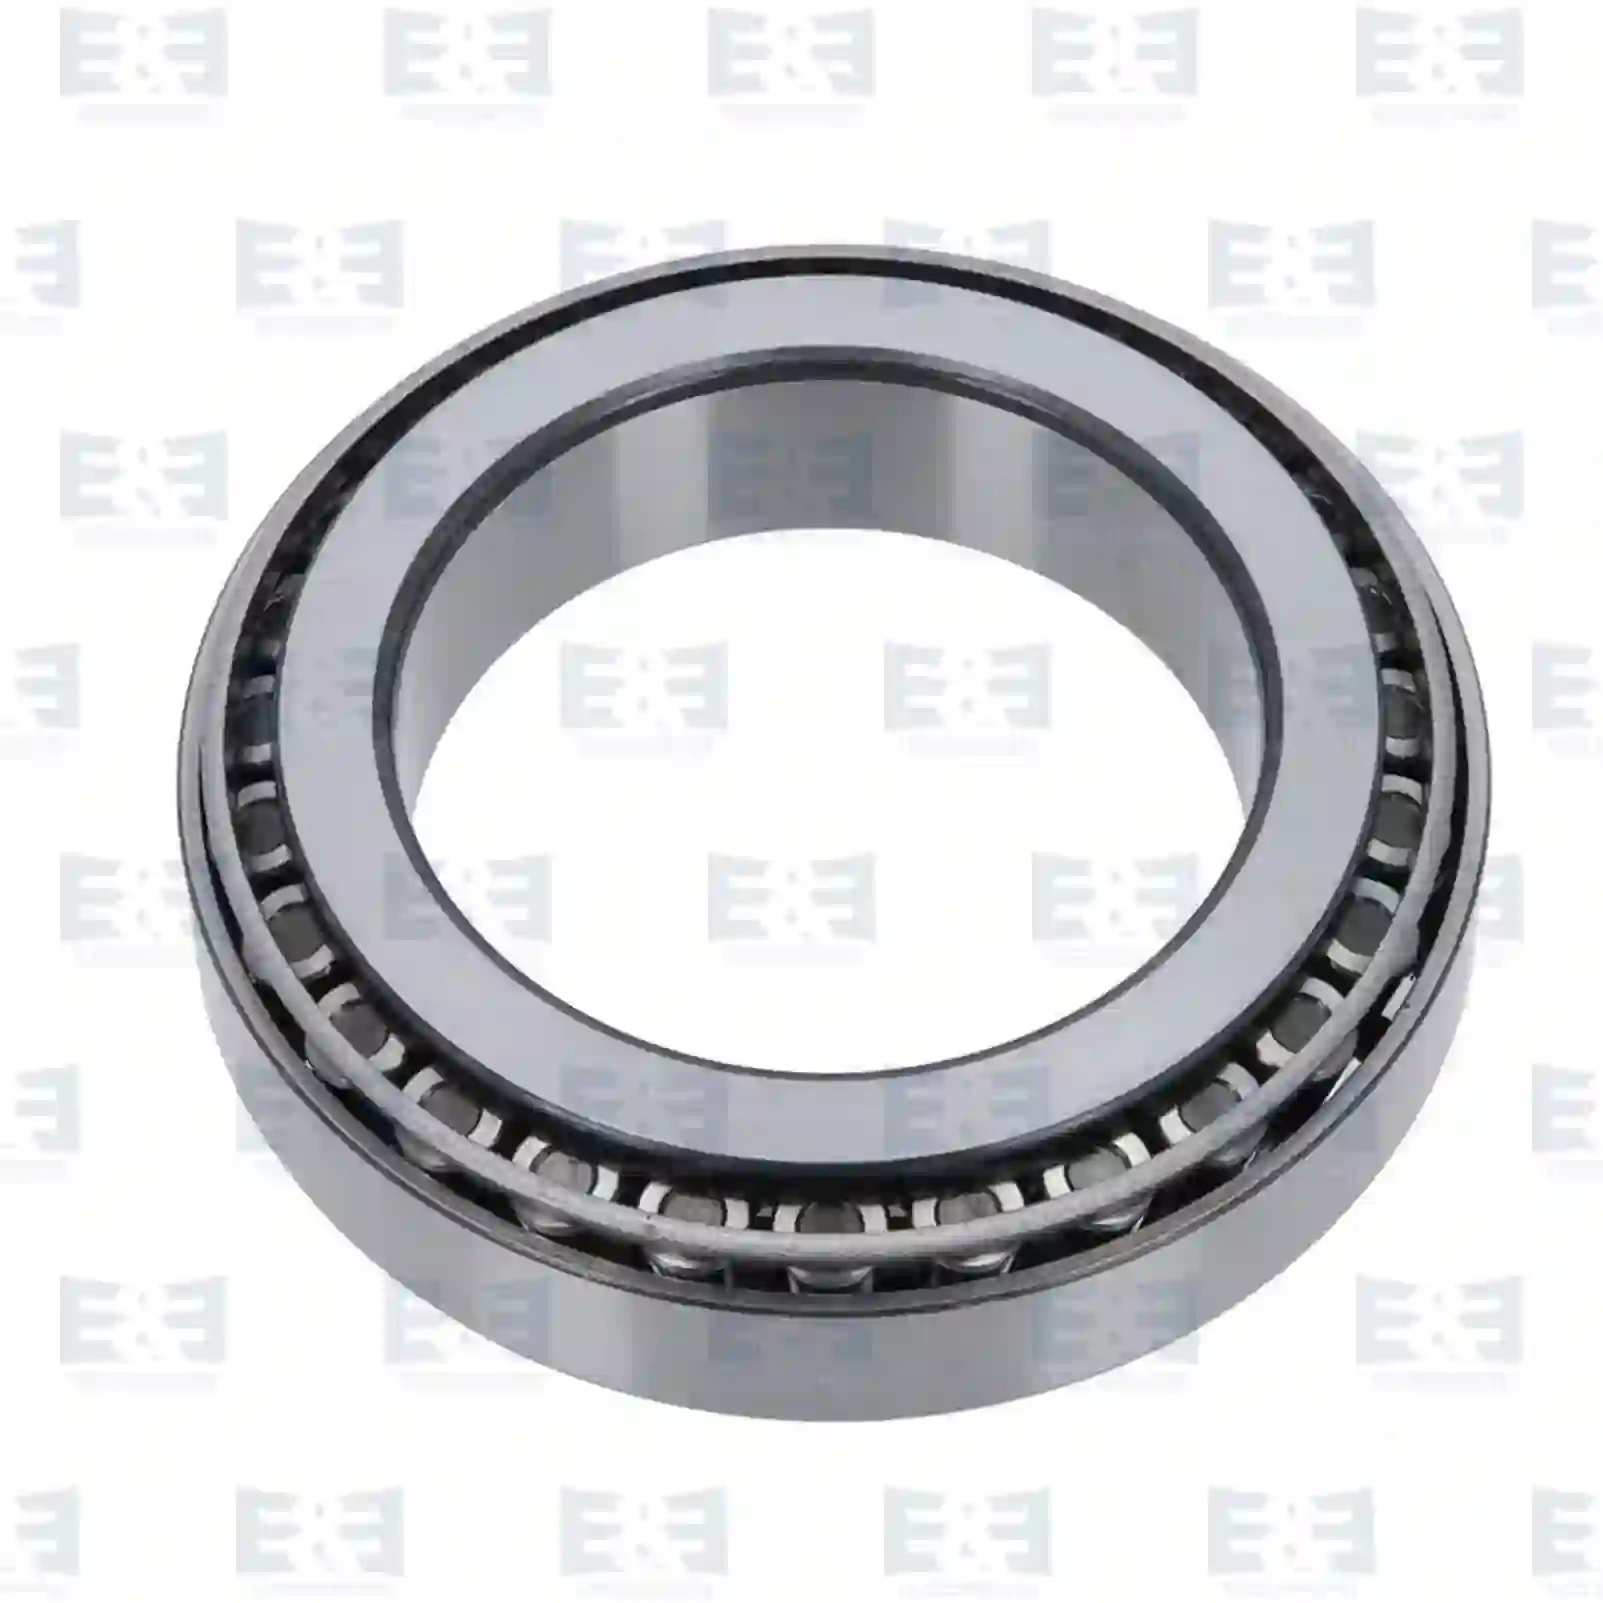 Tapered roller bearing, 2E2285799, 635584, CAL0856, 0003764595, 0003764595M1, 01102042, 01905219, 9437077, 01102042, 01103141, 01905219, 07173737, 07174013, 1102042, 1103141, 1905219, 06324801000, 81934200157, A5000052081, 0023336033, 5000055926, 32015XQ, 324714021000, 324741021000, 183735, 184068, ZG02983-0008 ||  2E2285799 E&E Truck Spare Parts | Truck Spare Parts, Auotomotive Spare Parts Tapered roller bearing, 2E2285799, 635584, CAL0856, 0003764595, 0003764595M1, 01102042, 01905219, 9437077, 01102042, 01103141, 01905219, 07173737, 07174013, 1102042, 1103141, 1905219, 06324801000, 81934200157, A5000052081, 0023336033, 5000055926, 32015XQ, 324714021000, 324741021000, 183735, 184068, ZG02983-0008 ||  2E2285799 E&E Truck Spare Parts | Truck Spare Parts, Auotomotive Spare Parts